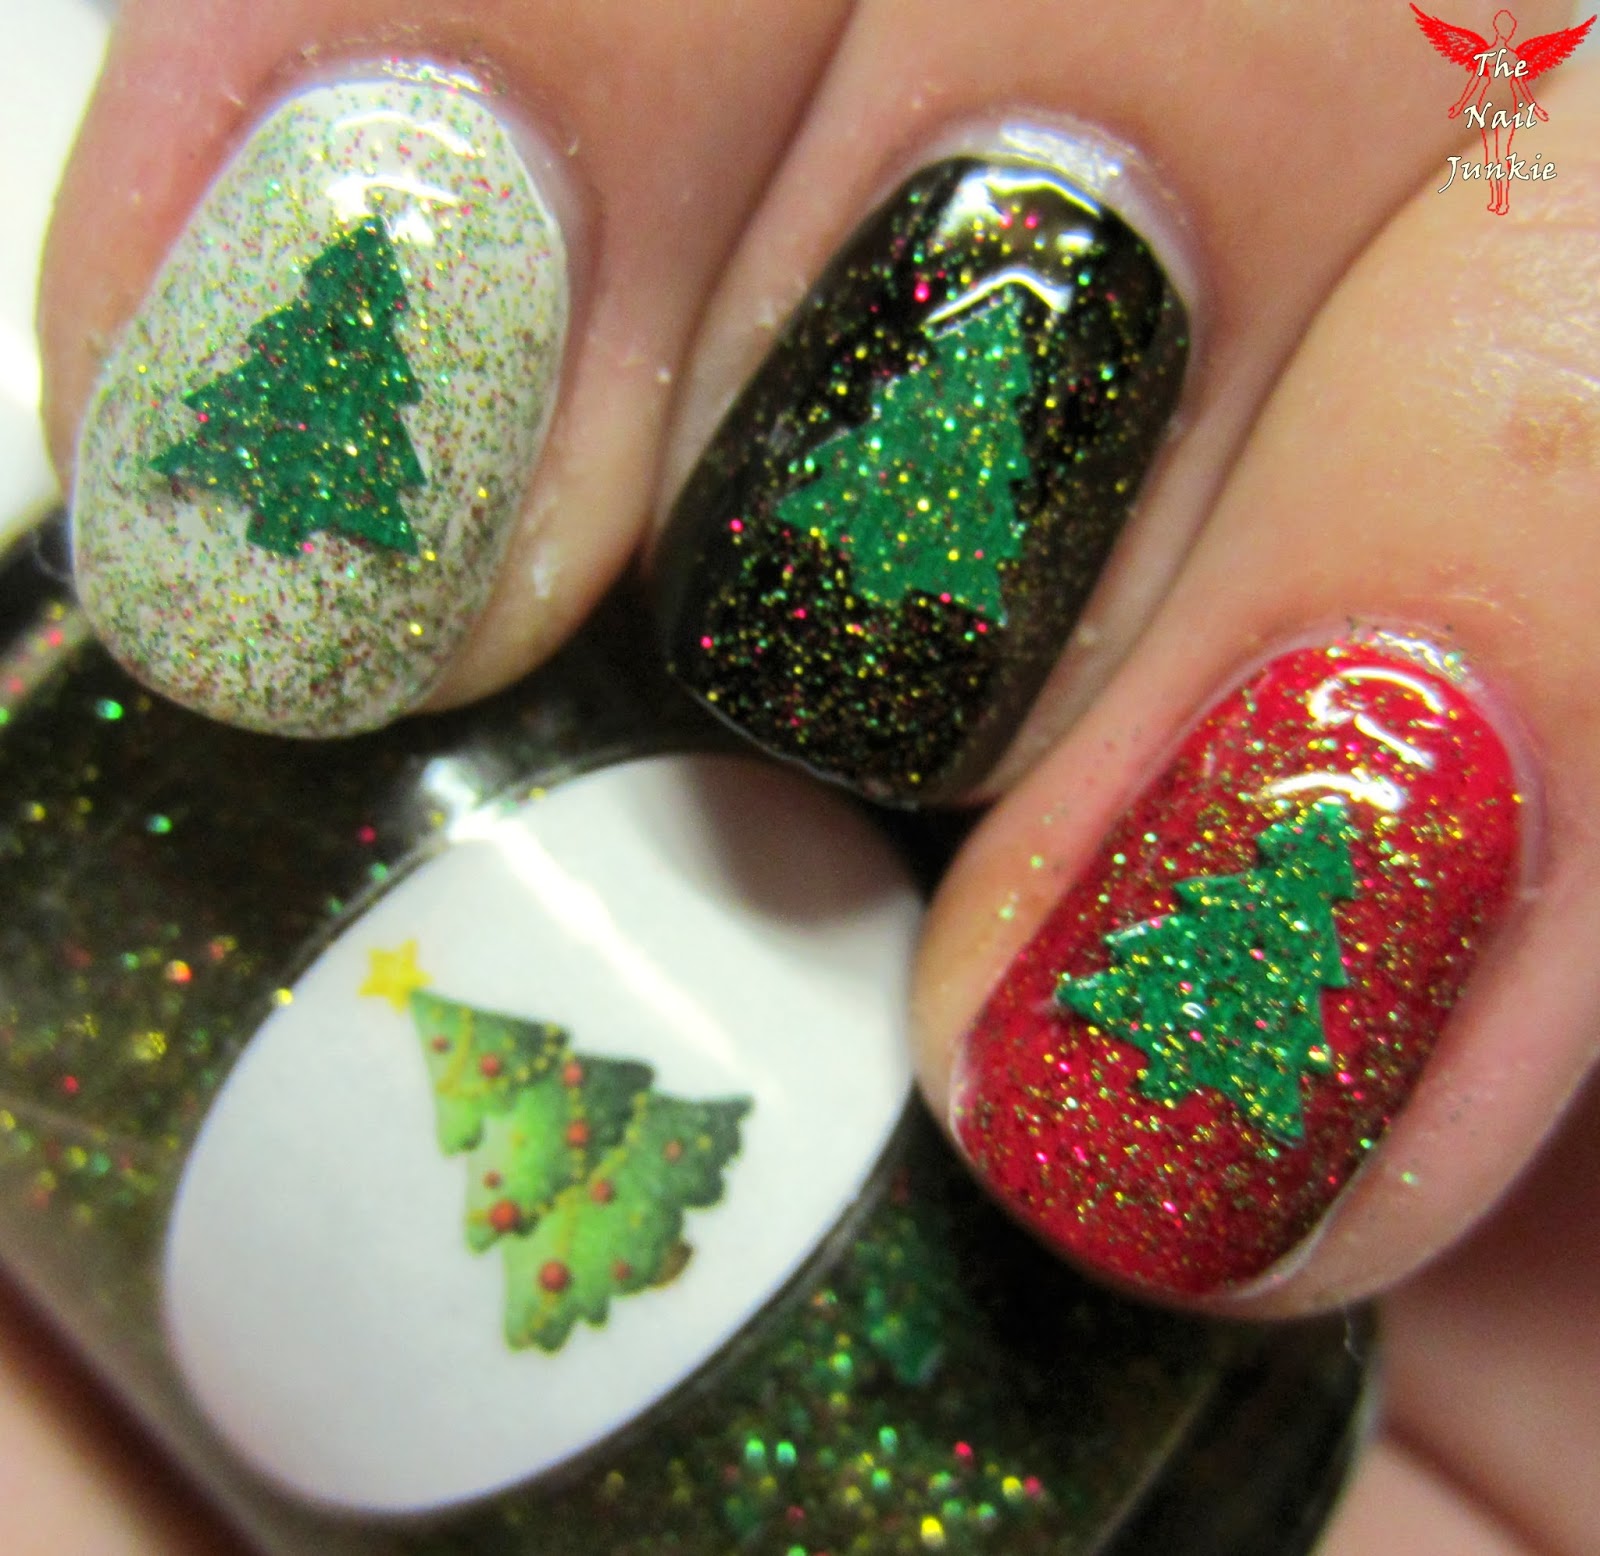 The Nail Junkie: HOLIDAY 2013 POLISH COLLECTION: Release and Giveaway!